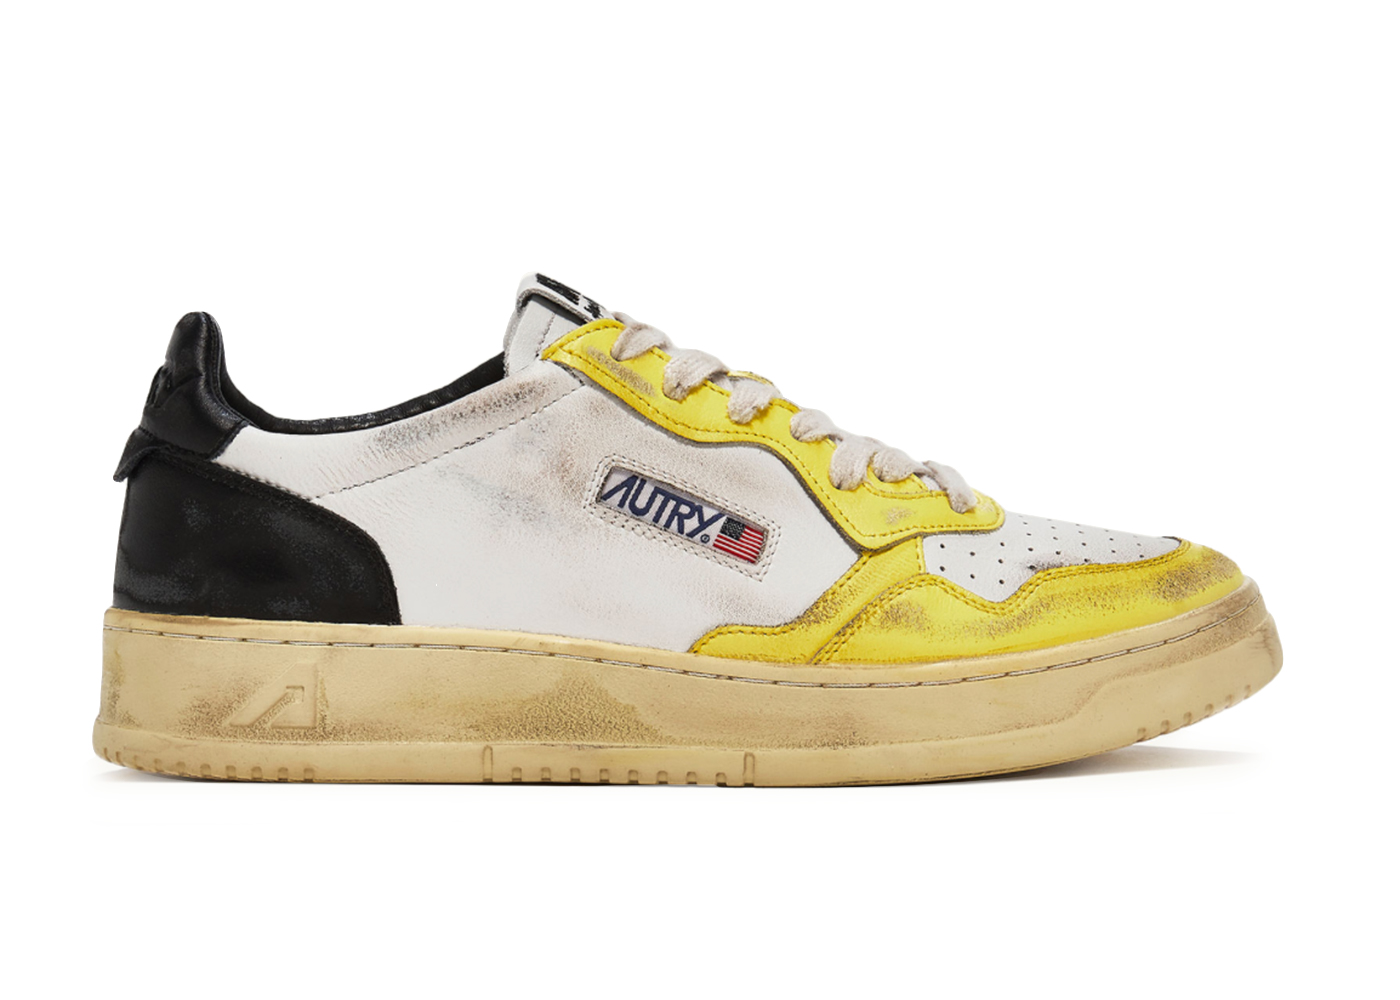 Autry Medalist Leather Low Super Vintage White Yellow Black